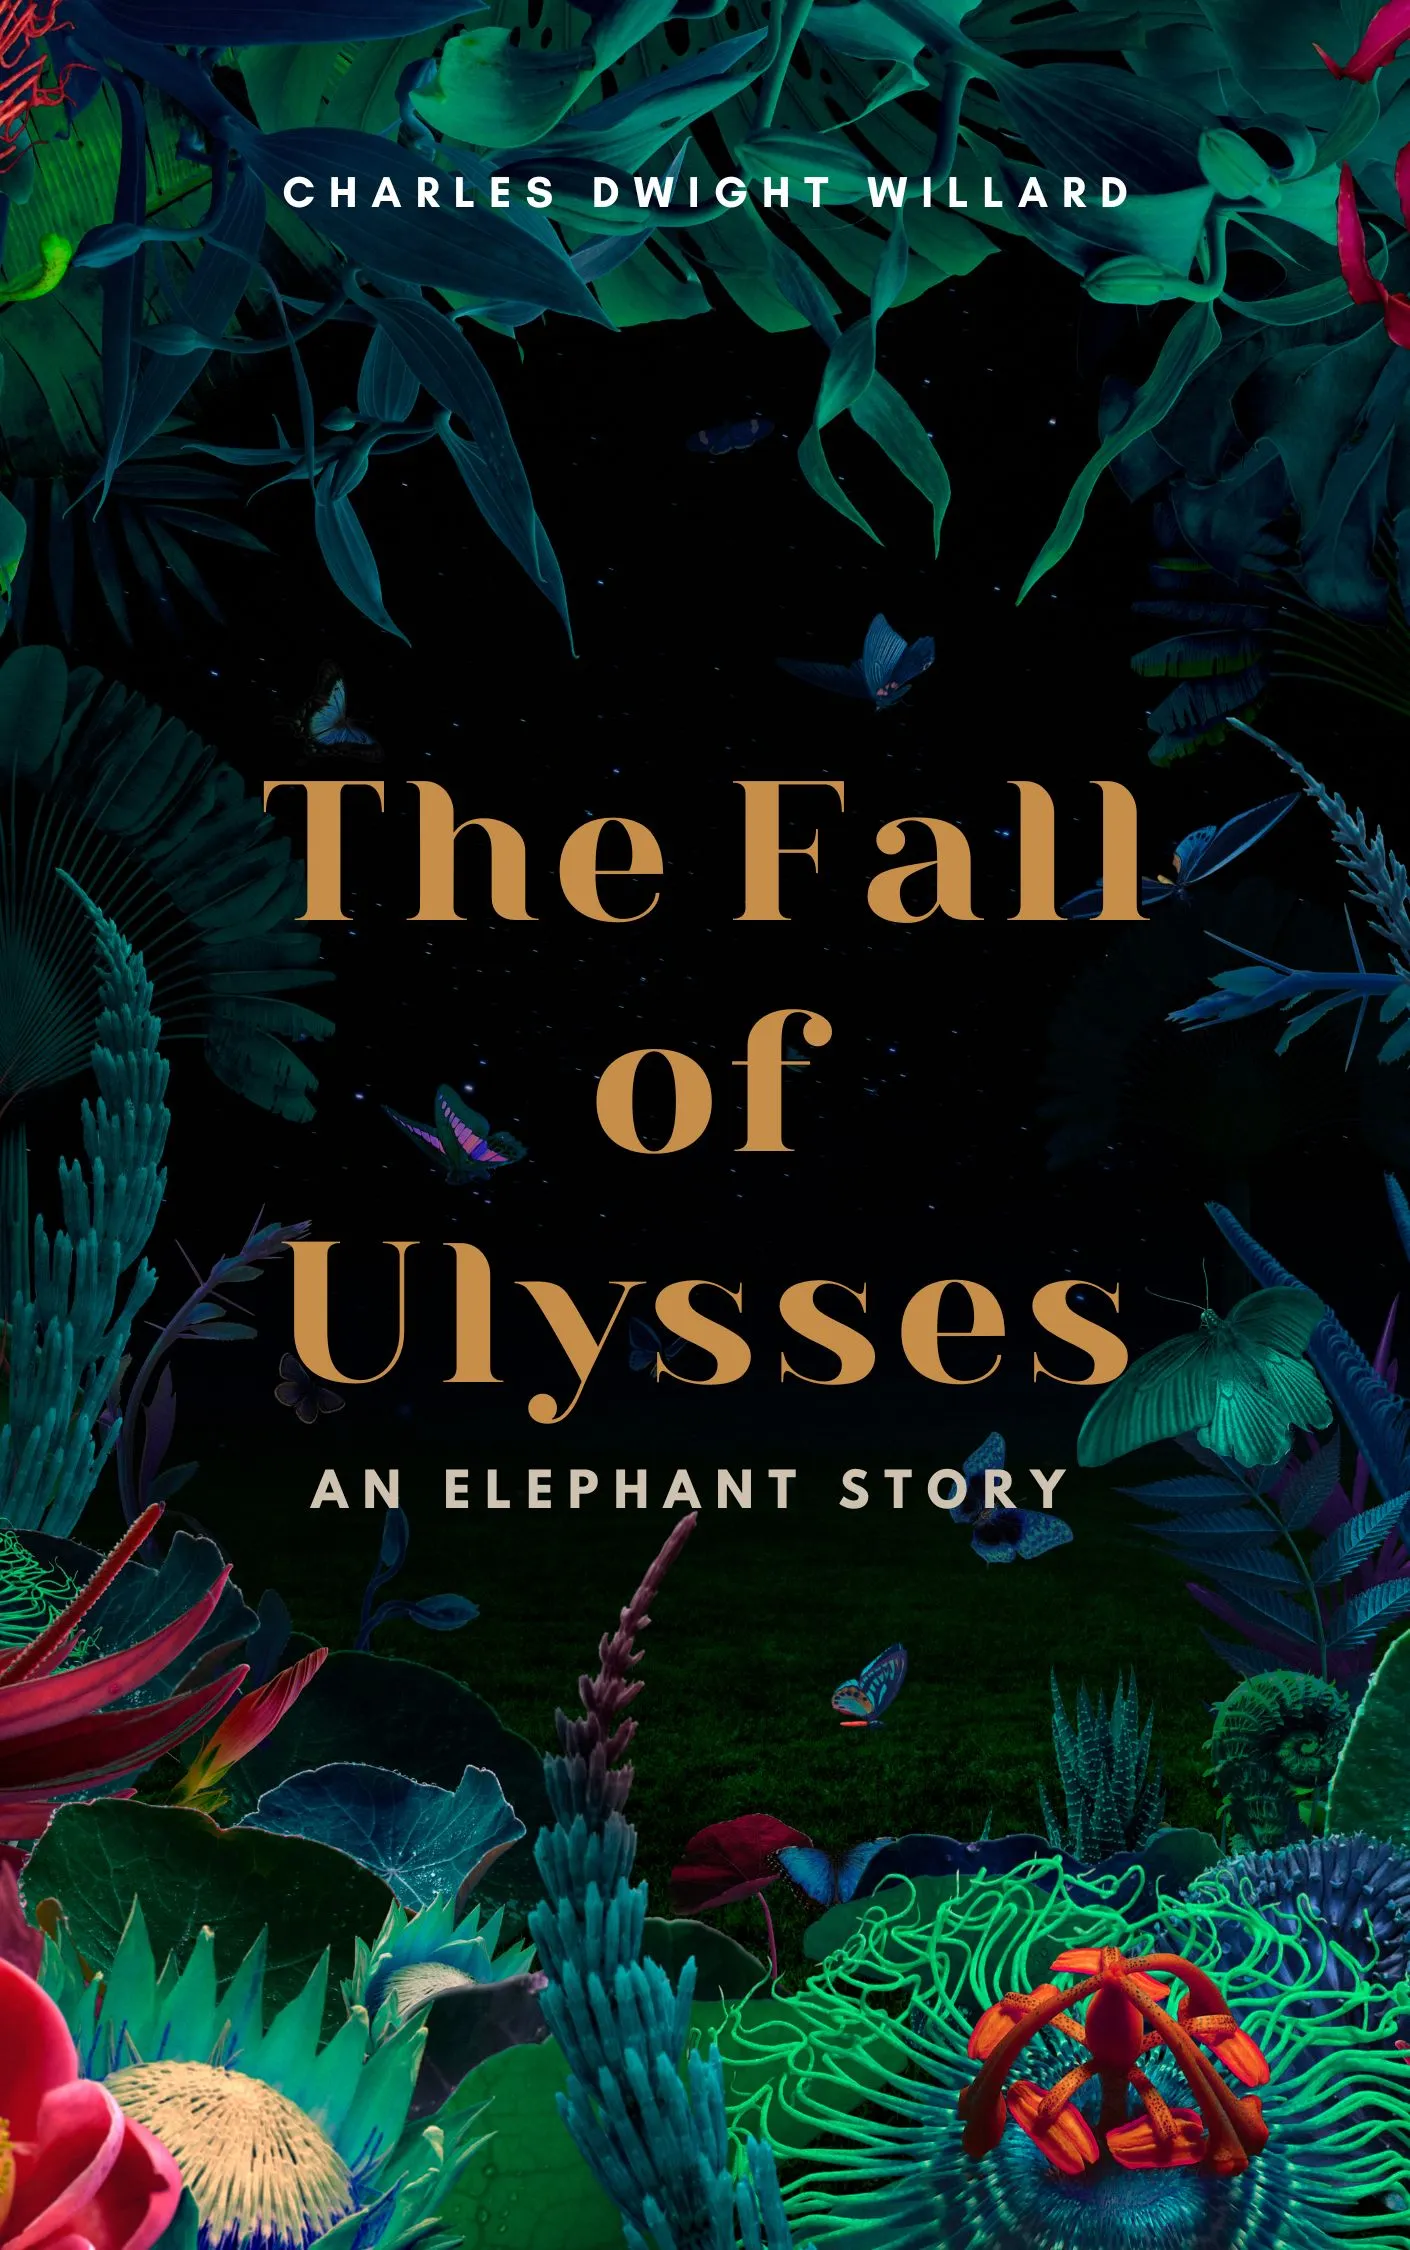 The Fall of Ulysses Audiobook by Charles Dwight Willard